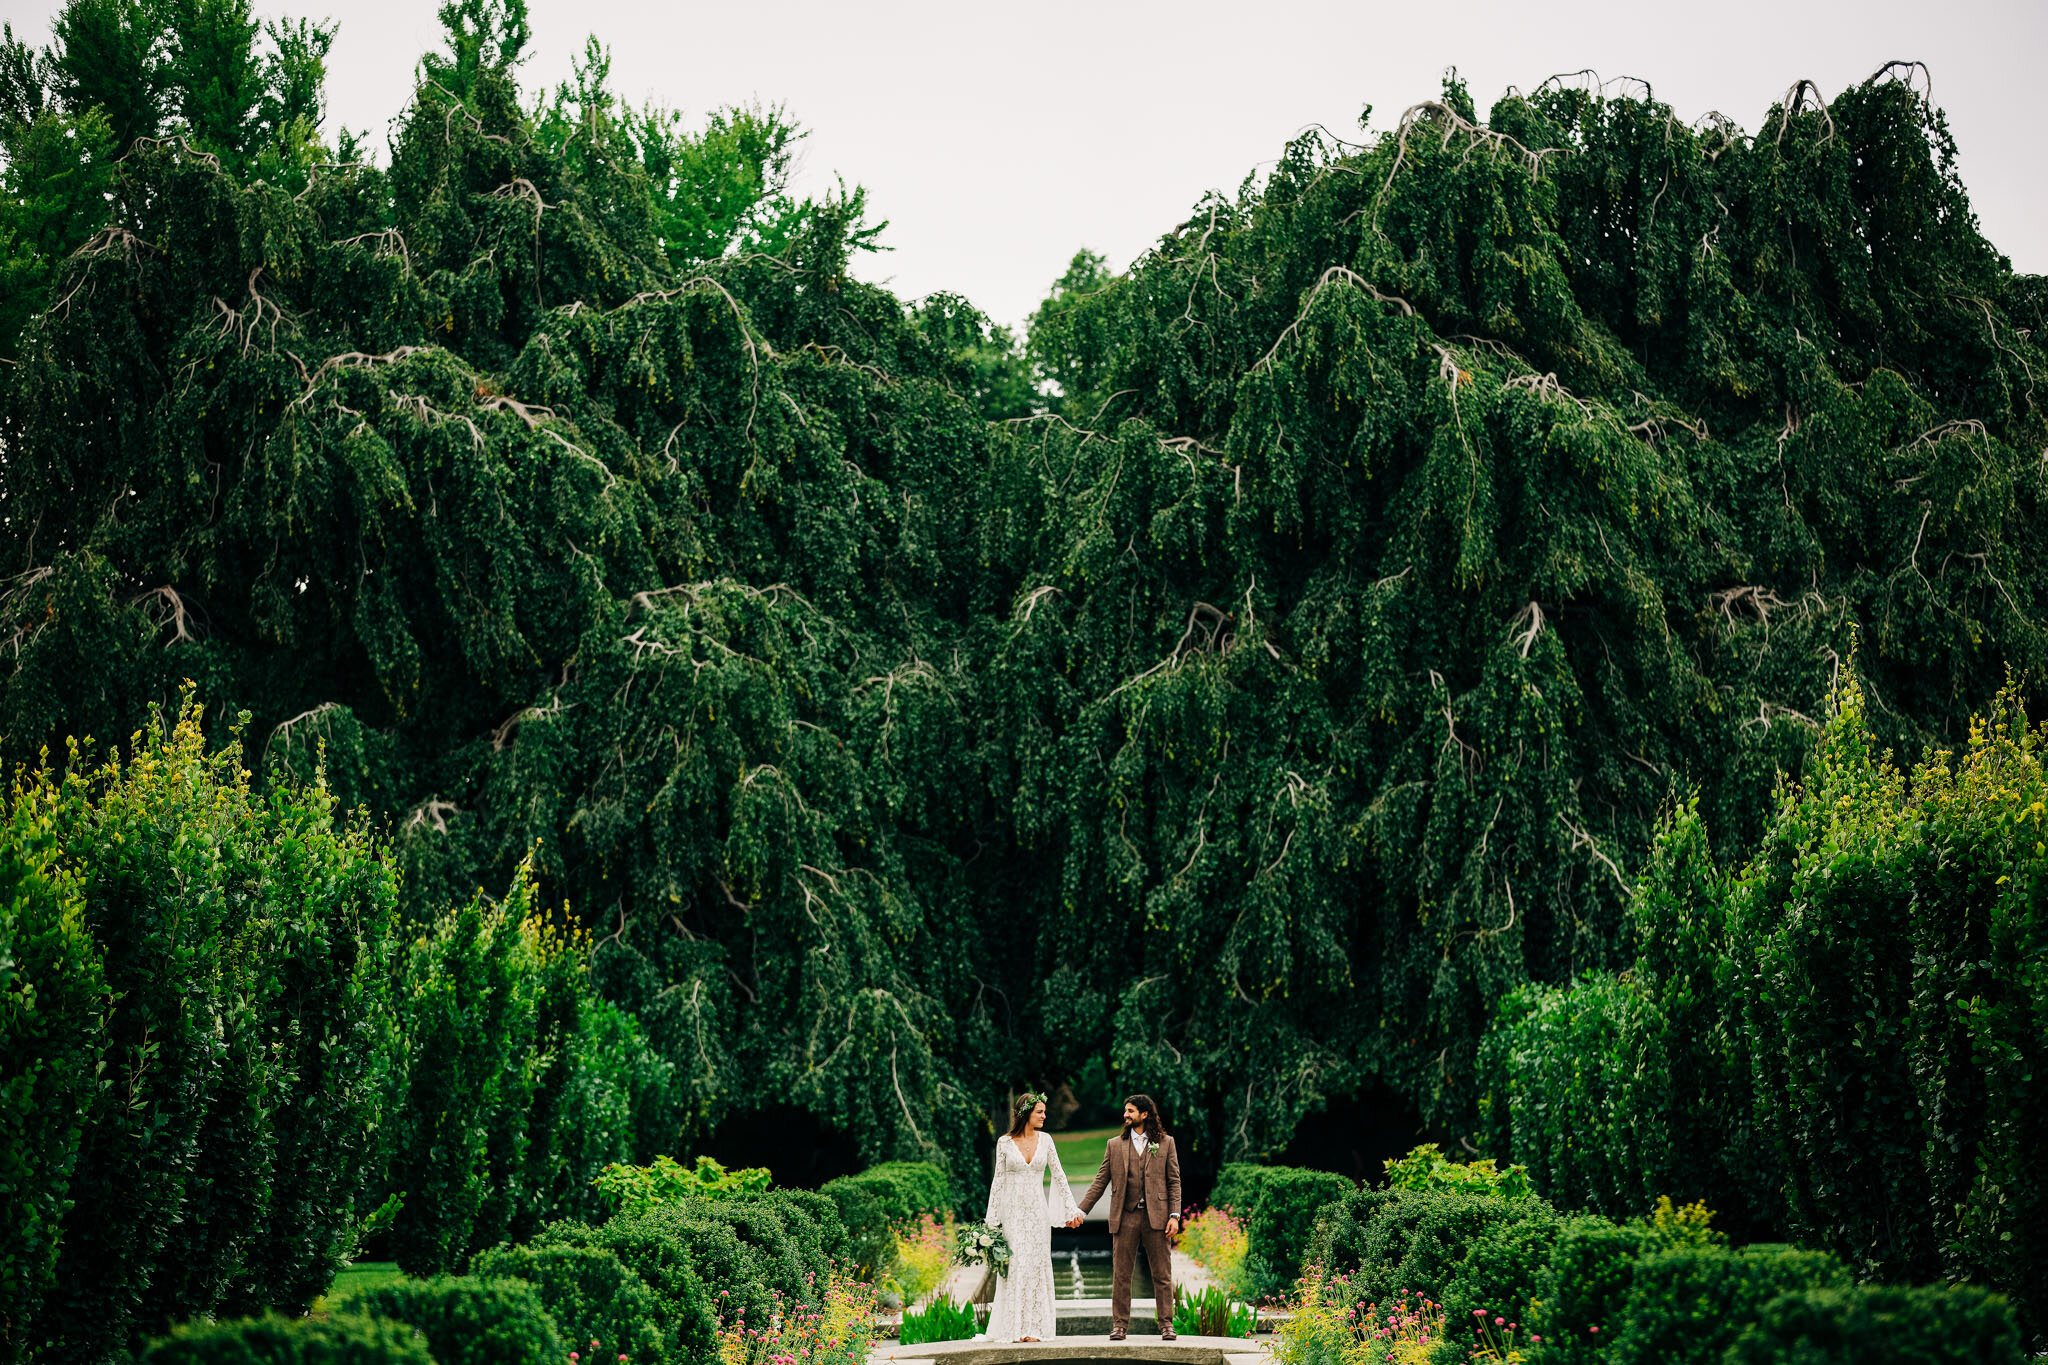 016-ROCKSTEADY IMAGES [Allie+Mike Wedding (Squarespace)]-ROQ11326 PSD.jpg